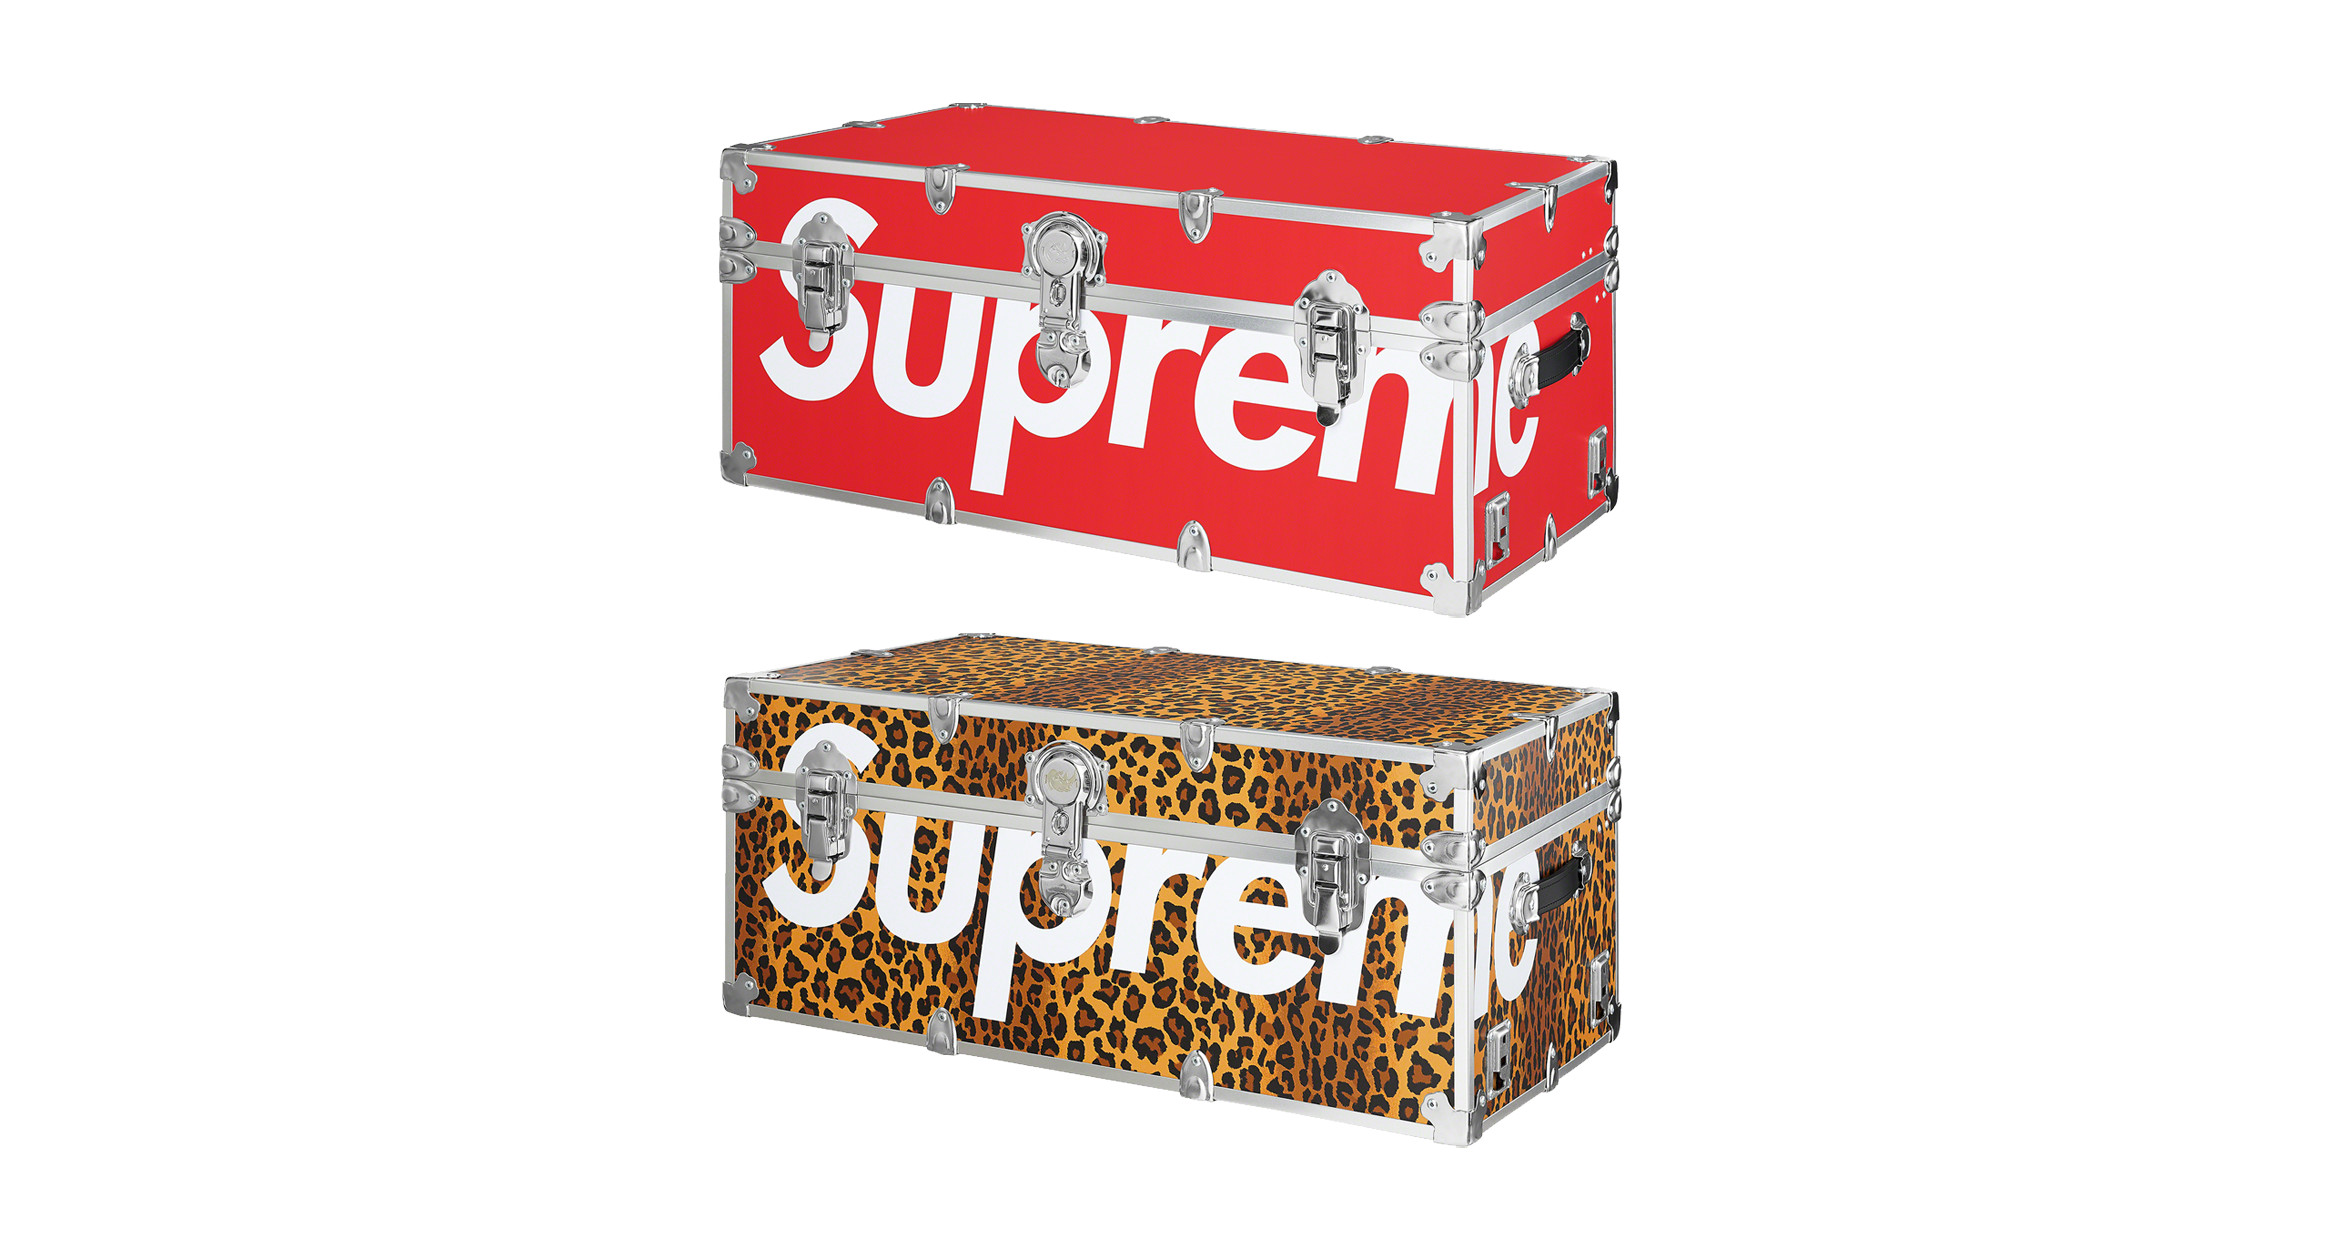 We bought this Supreme Rhino Trunk!